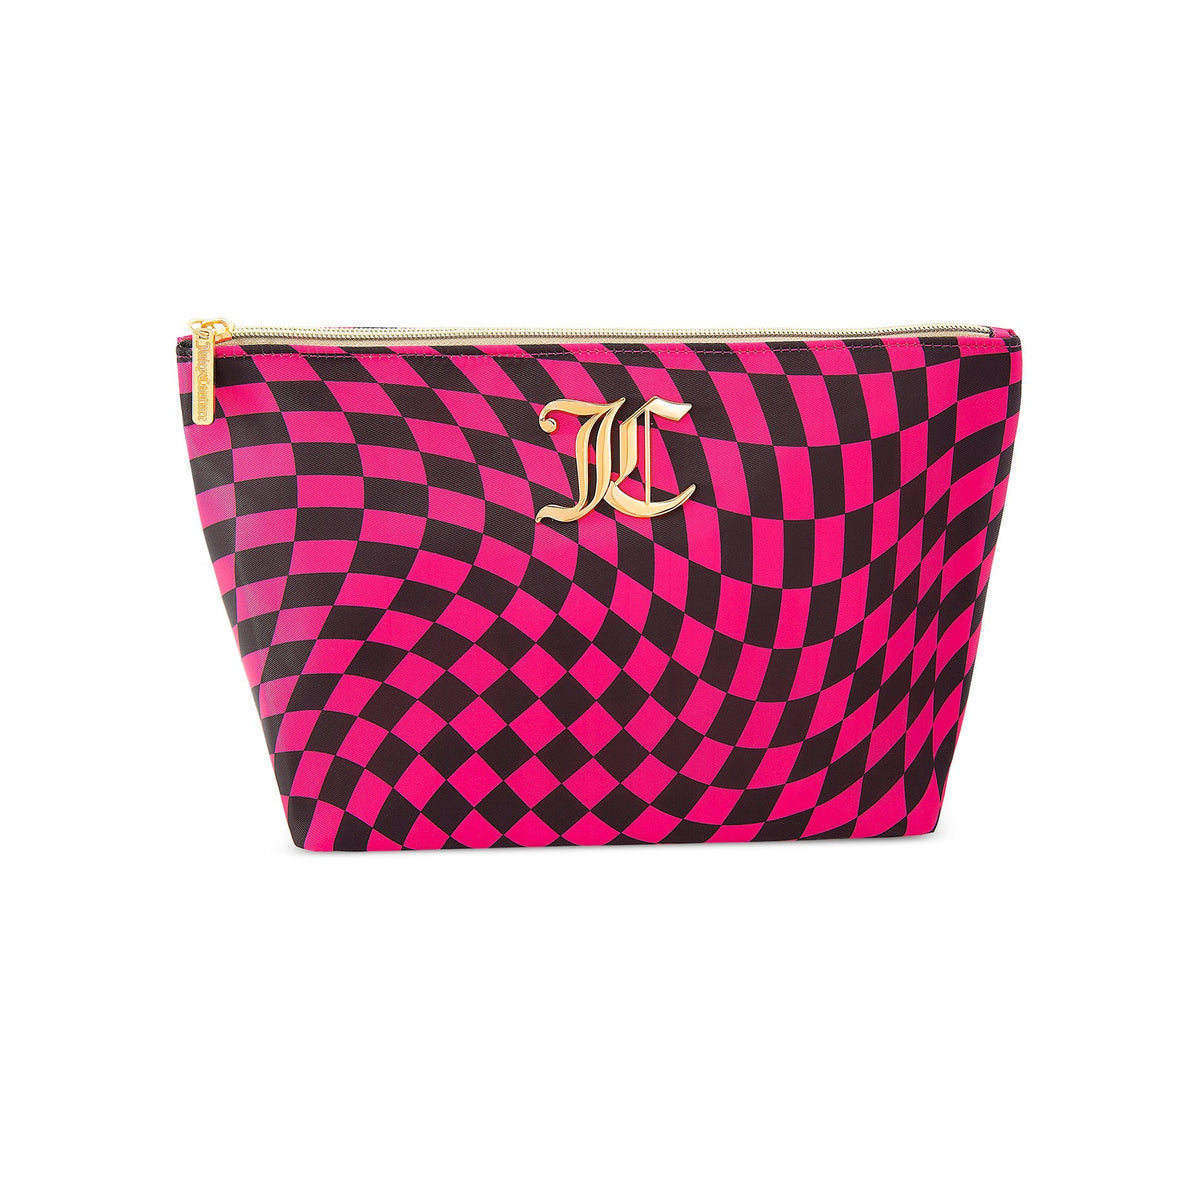 Juicy Couture Monogram Makeup Pouch Checkered Pink